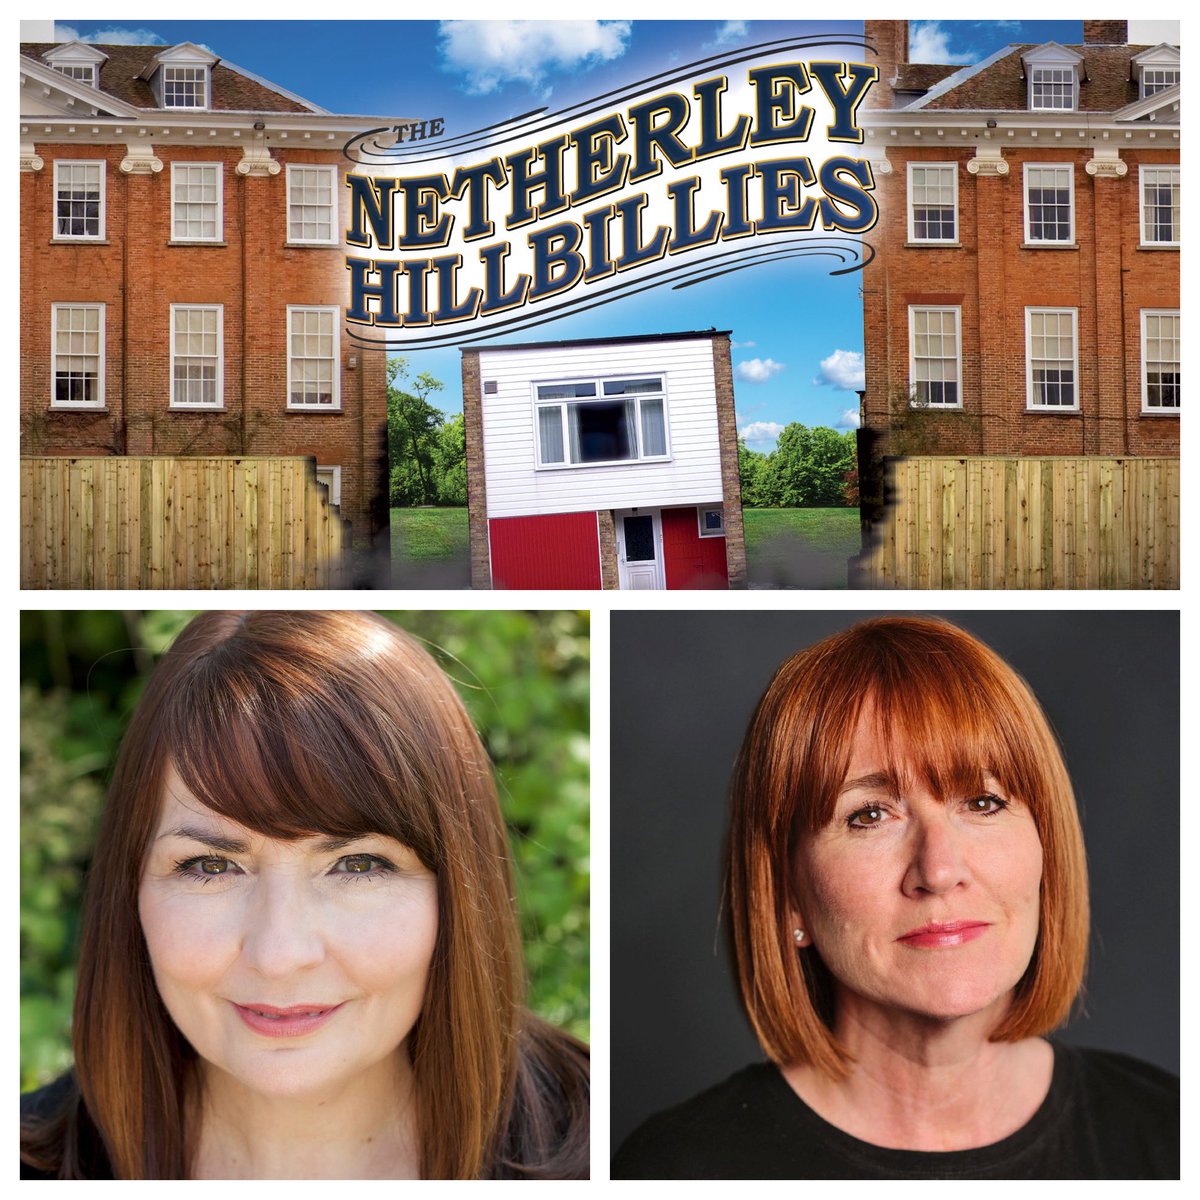 Wishing our LYNN FRANCIS @LynnFranc65 and SARAH WHITE a great start to rehearsals over @RoyalCourtLiv for #NetherleyHillbillies